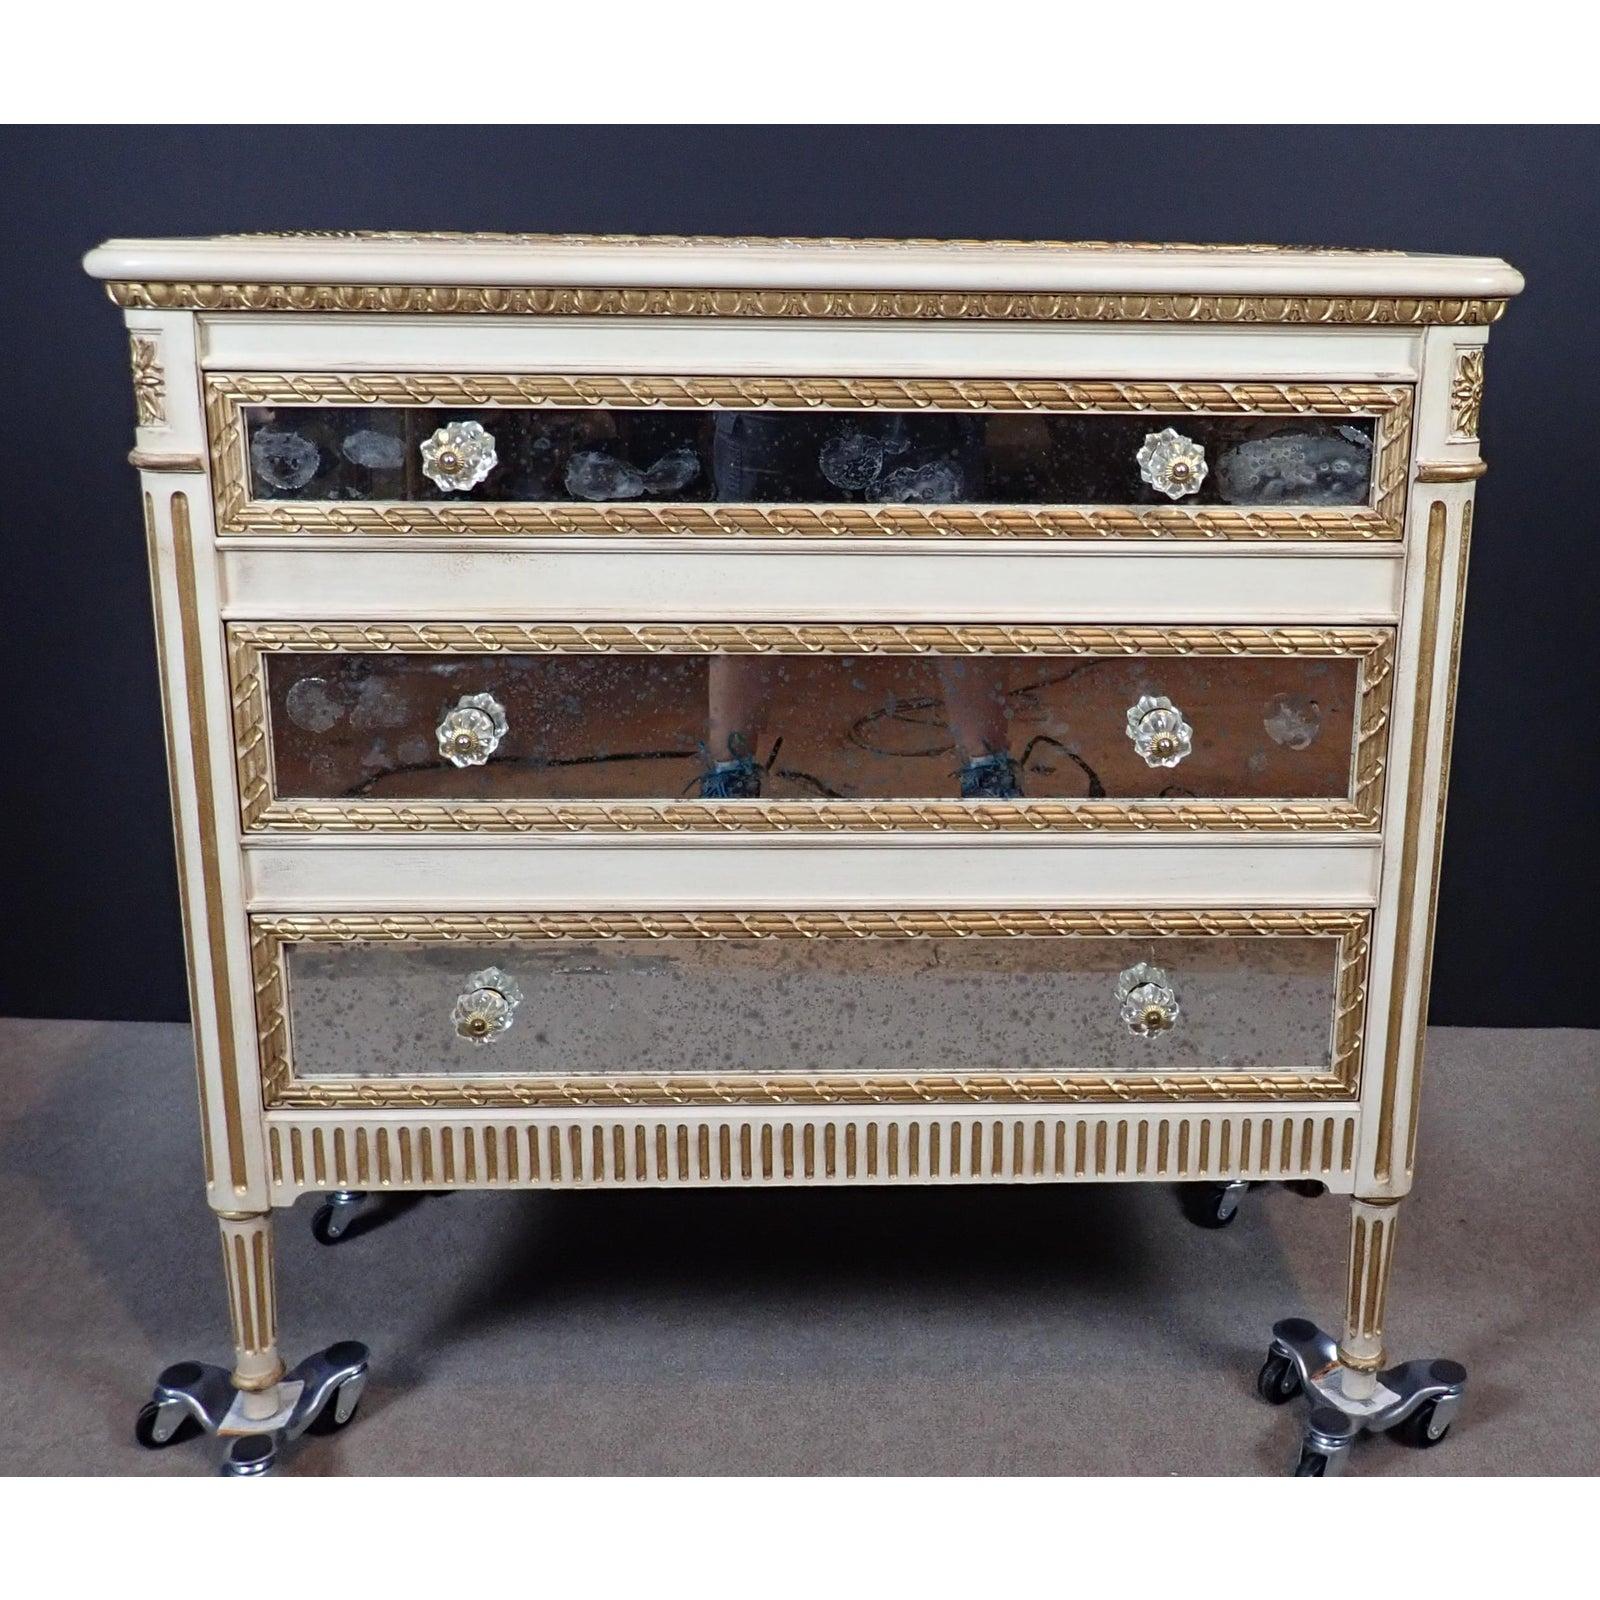 Louis XVI style mirrored chest of drawers. Carved, painted and gilt three-drawer chest has mirrored panels top, sides and each drawer.
  